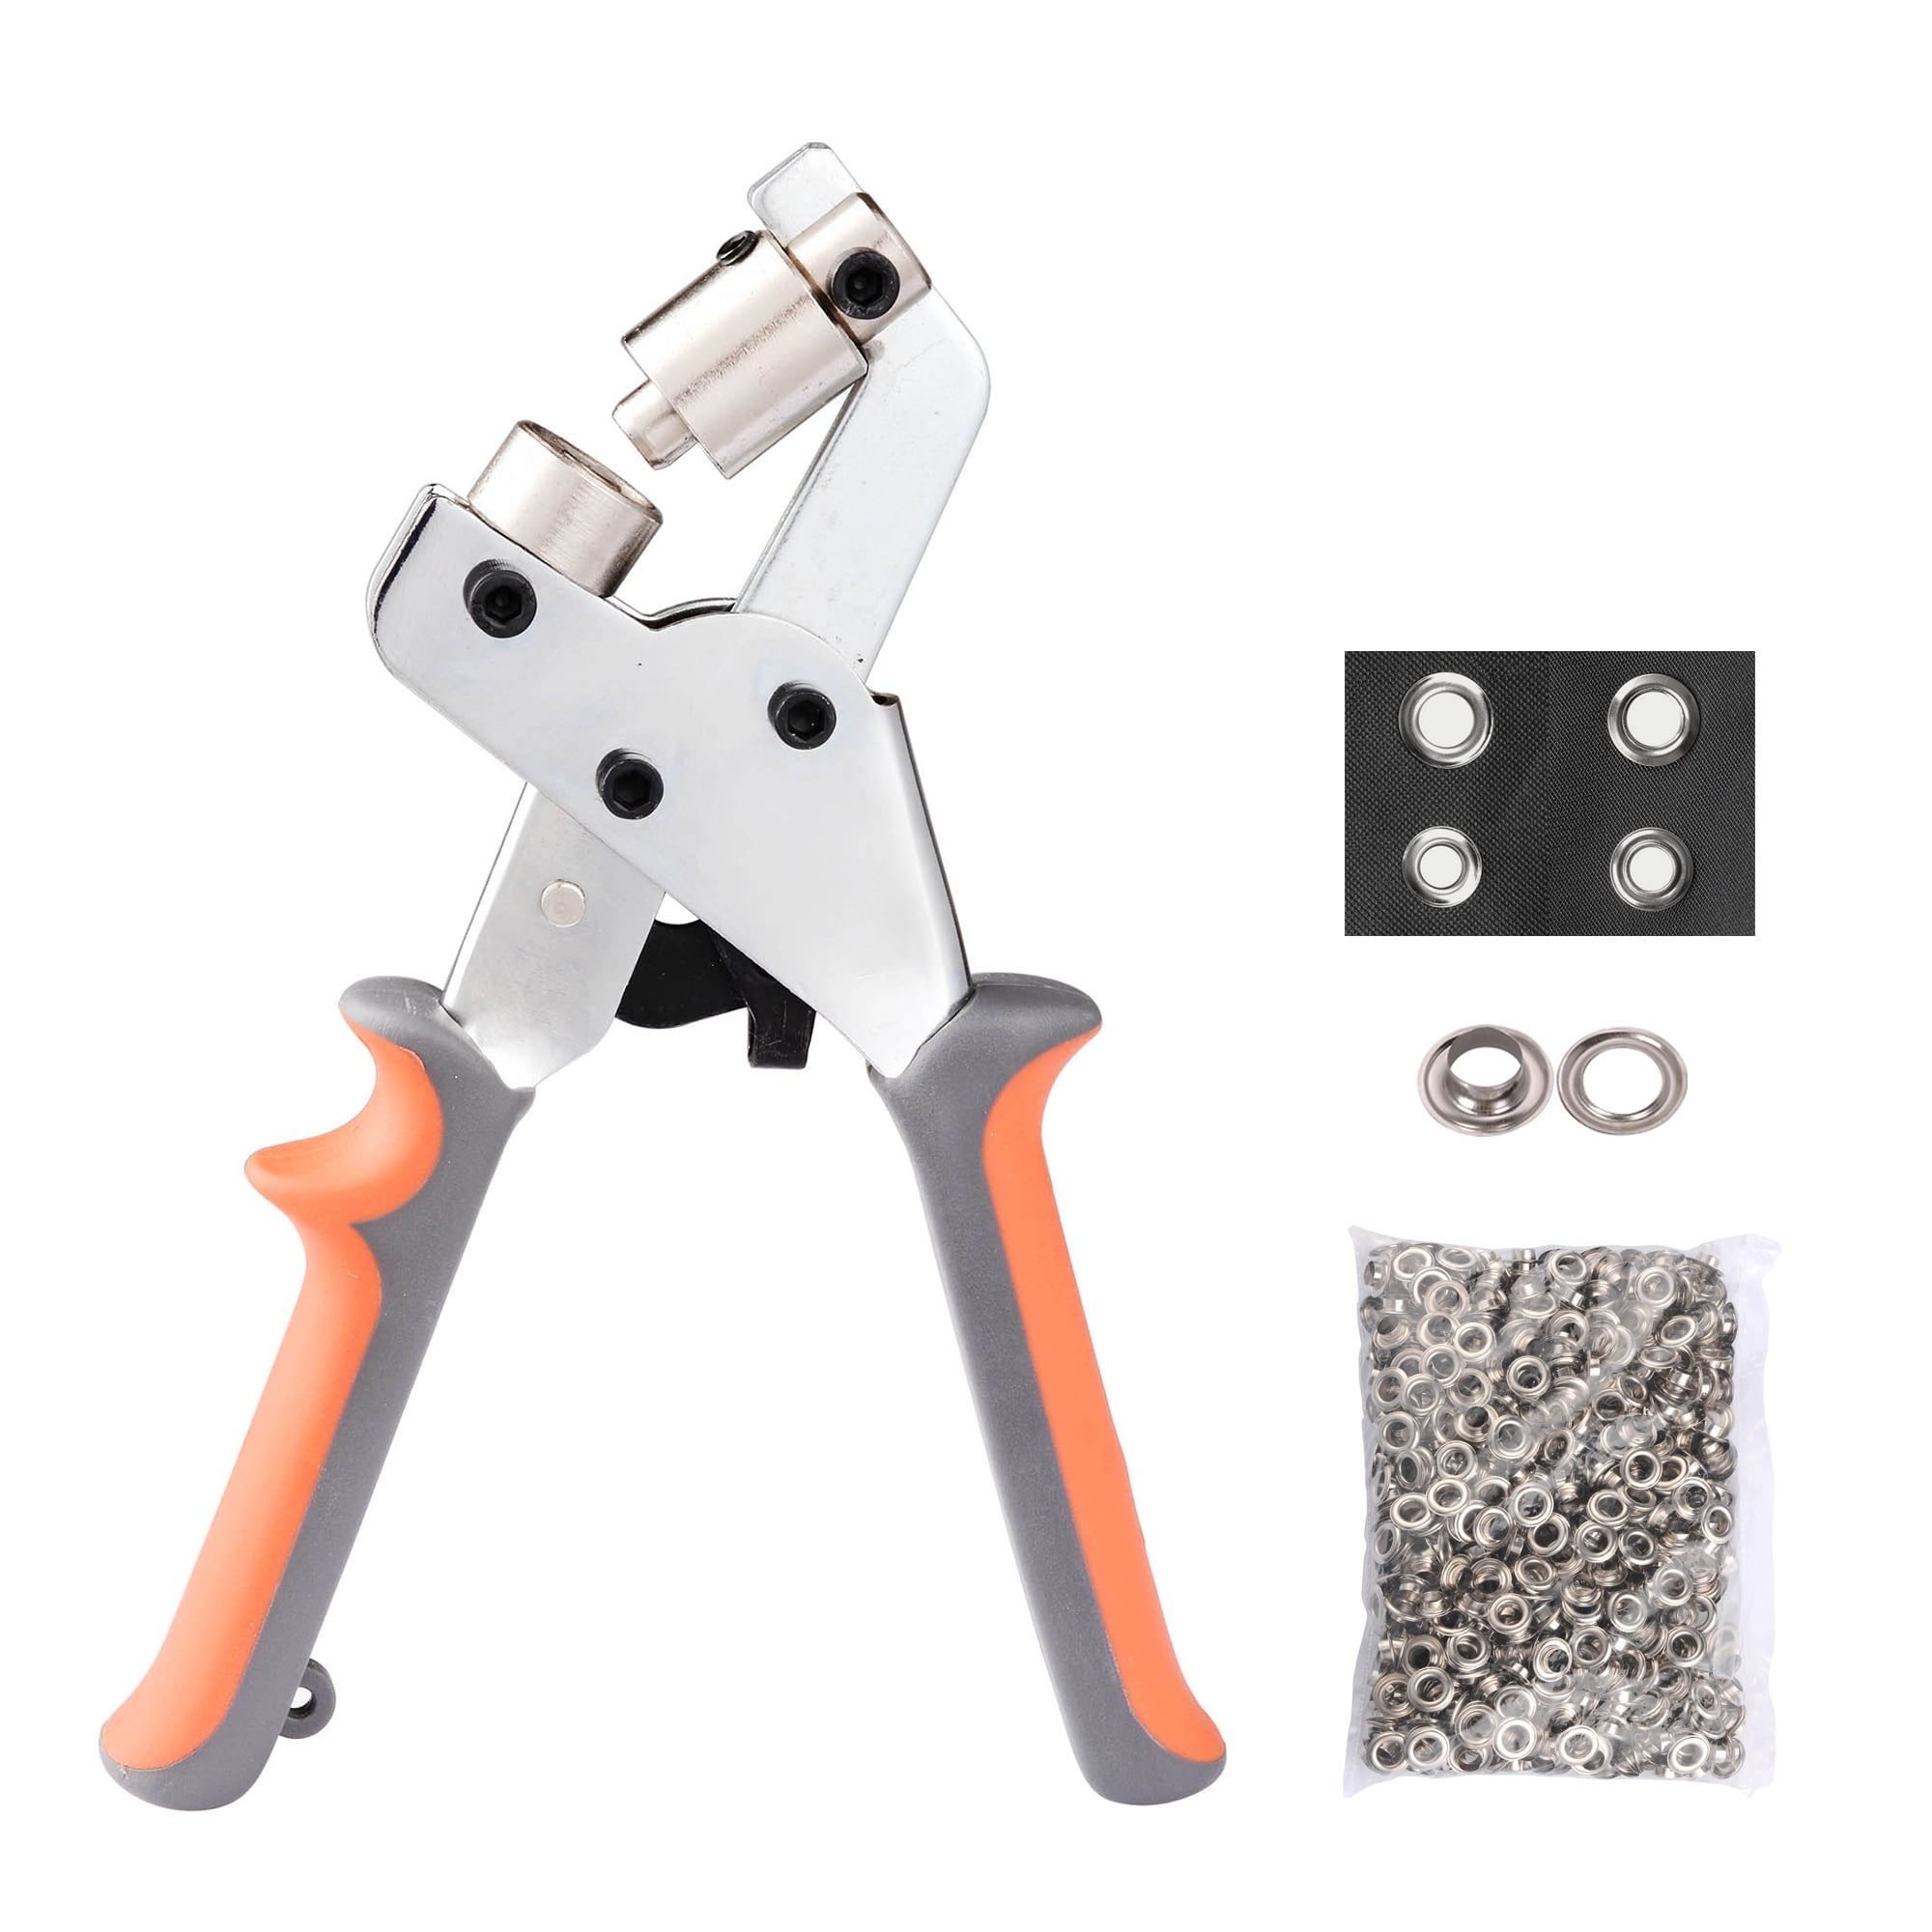 Yescom Grommet Tool Kit Handheld Portable Manual Grommet Machine Hand Press Puncher  Hole Punch Piler with 500pcs 3/8